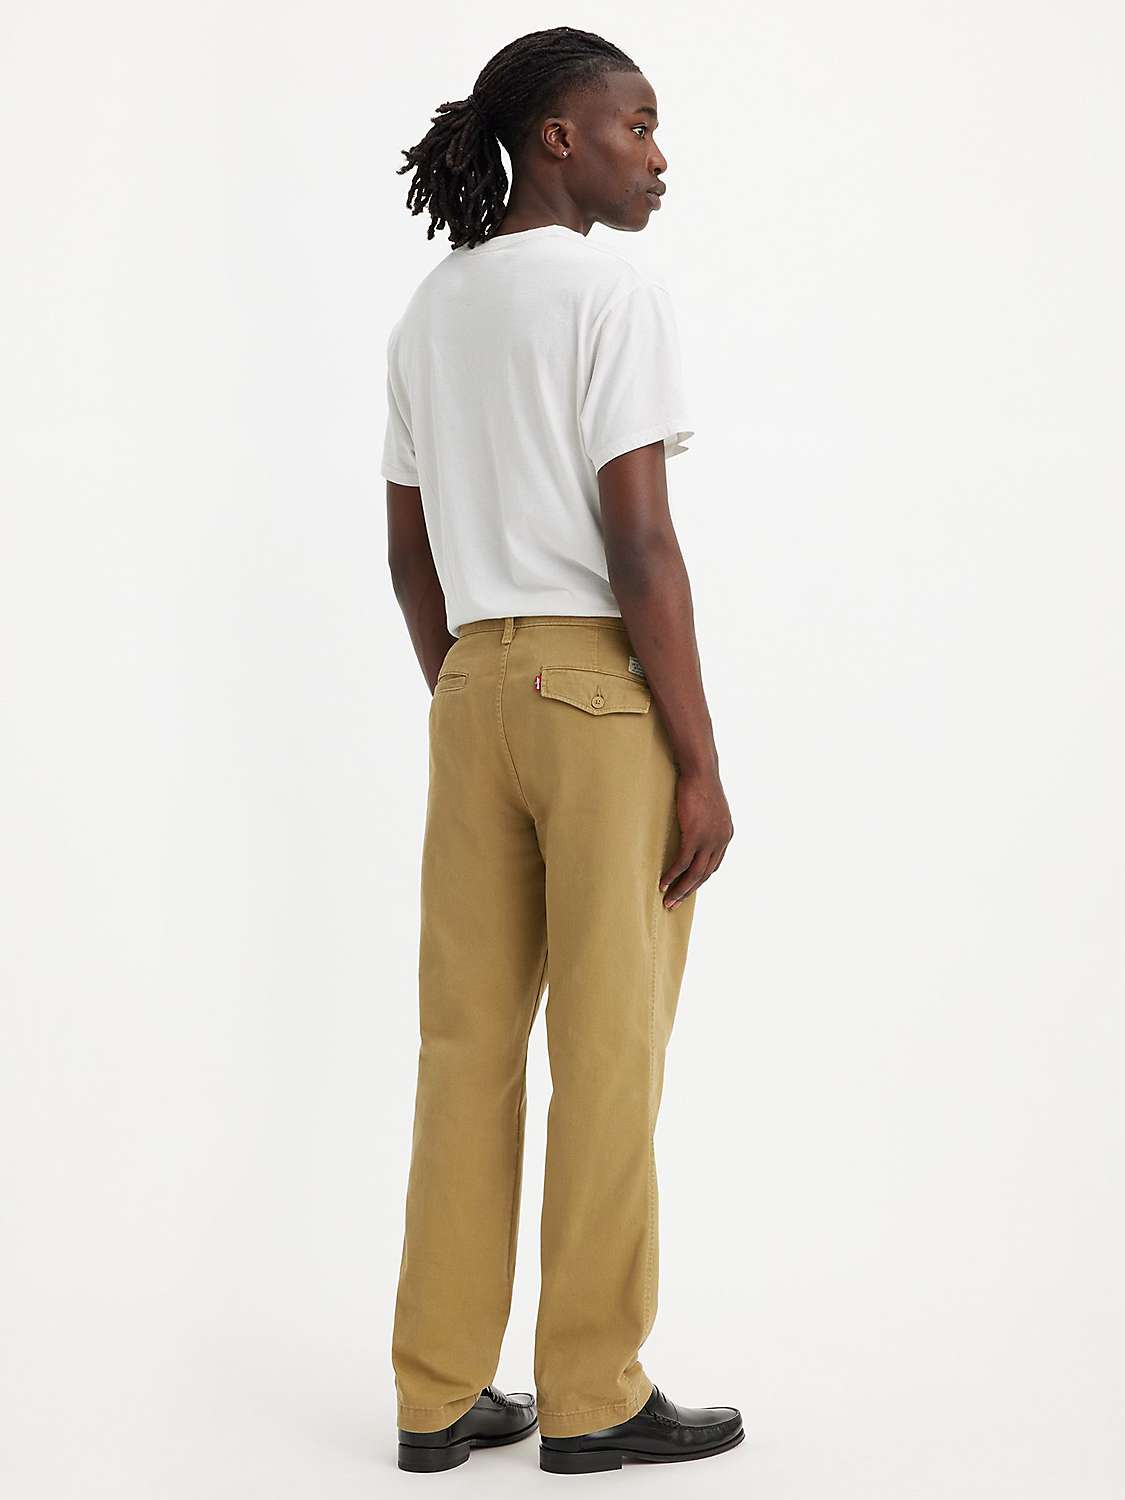 Buy Levi's Chino Authentic Straight Trousers, Khaki Online at johnlewis.com